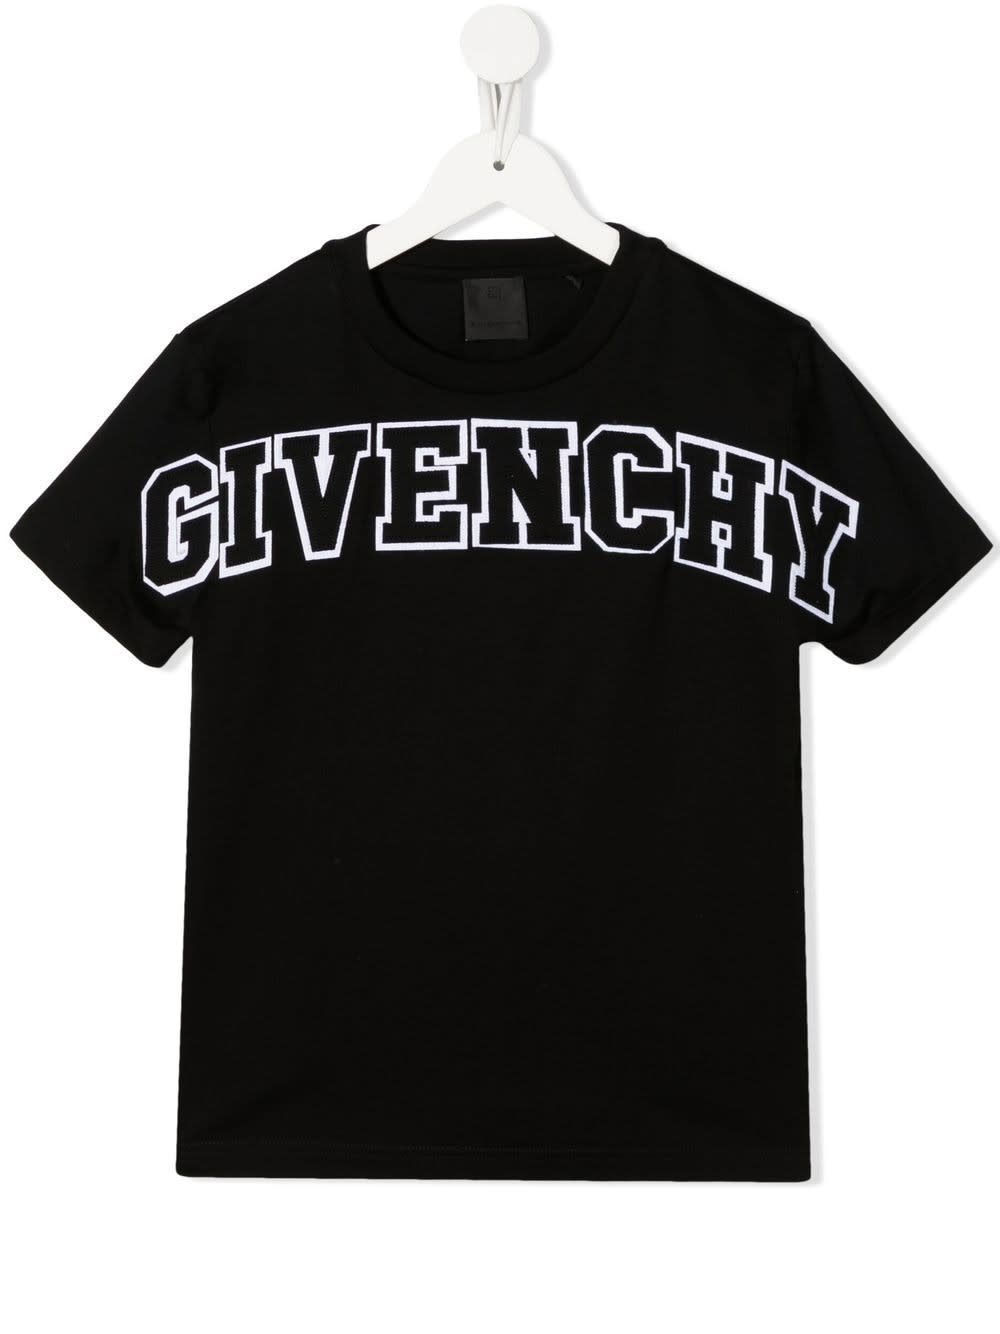 Kids Black T-shirt With Givenchy Old School Print